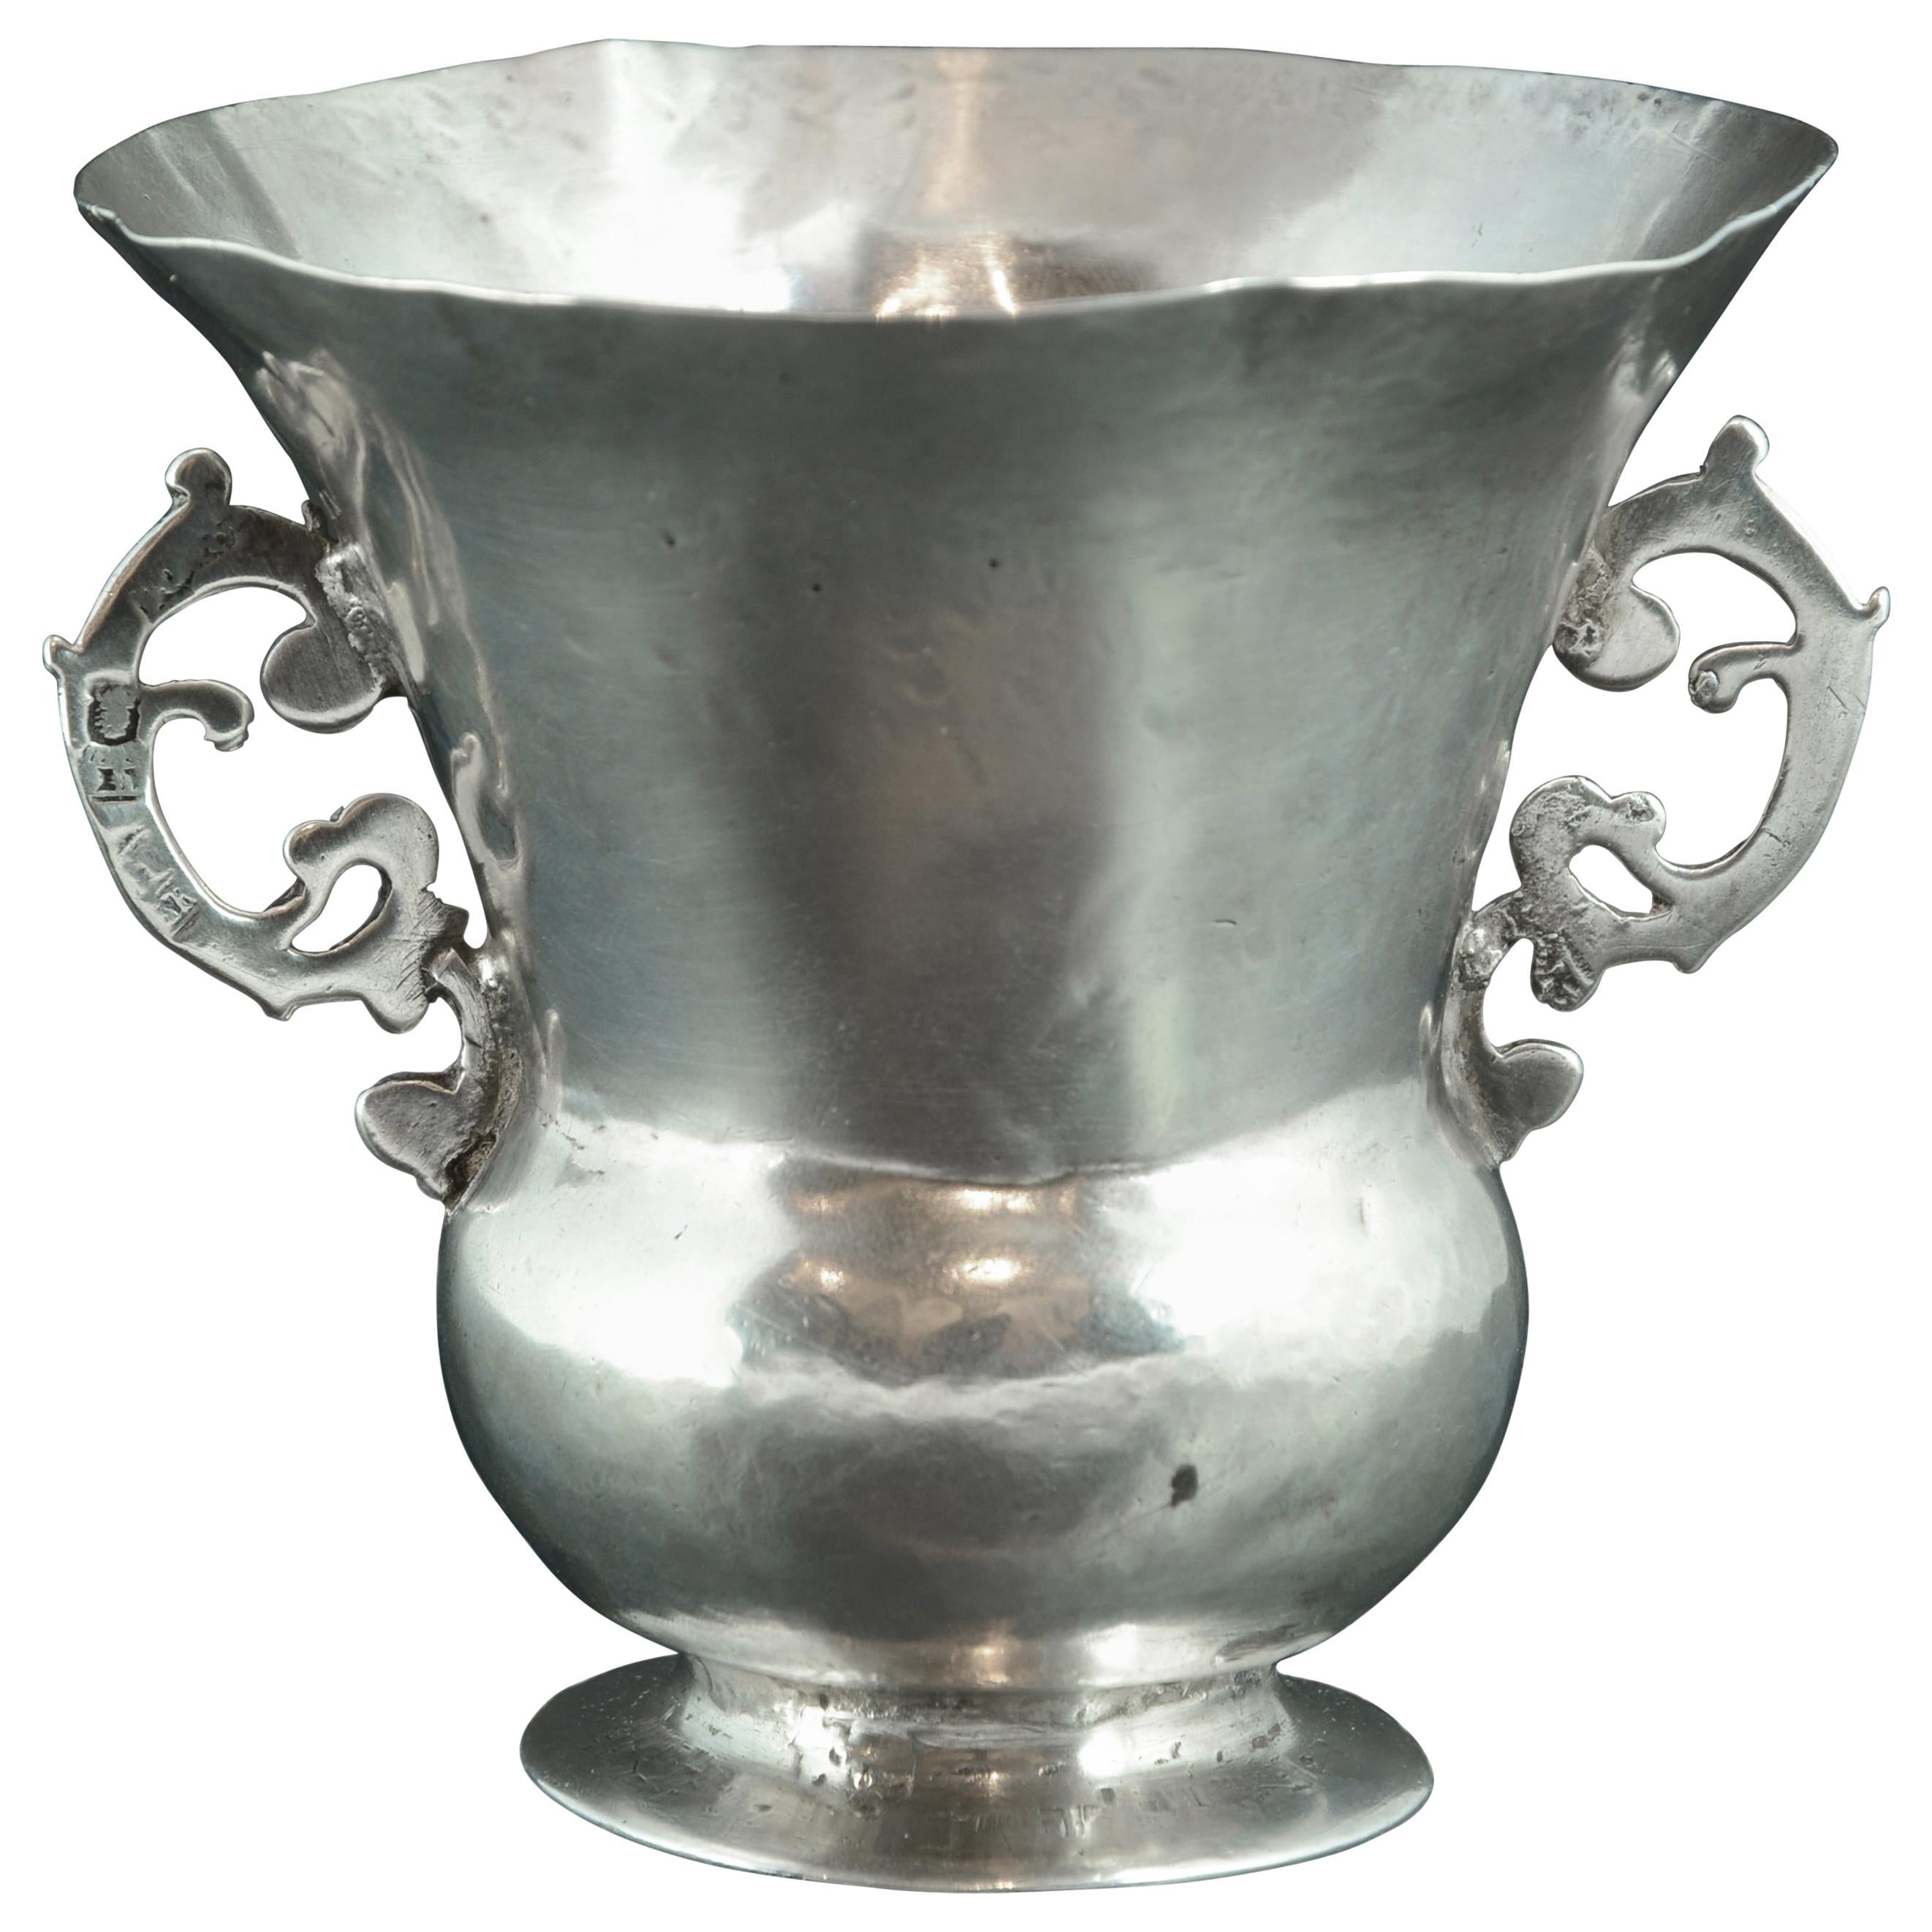 Silver Cup 'Bernegal' with Hallmarks, 17th-18th Century